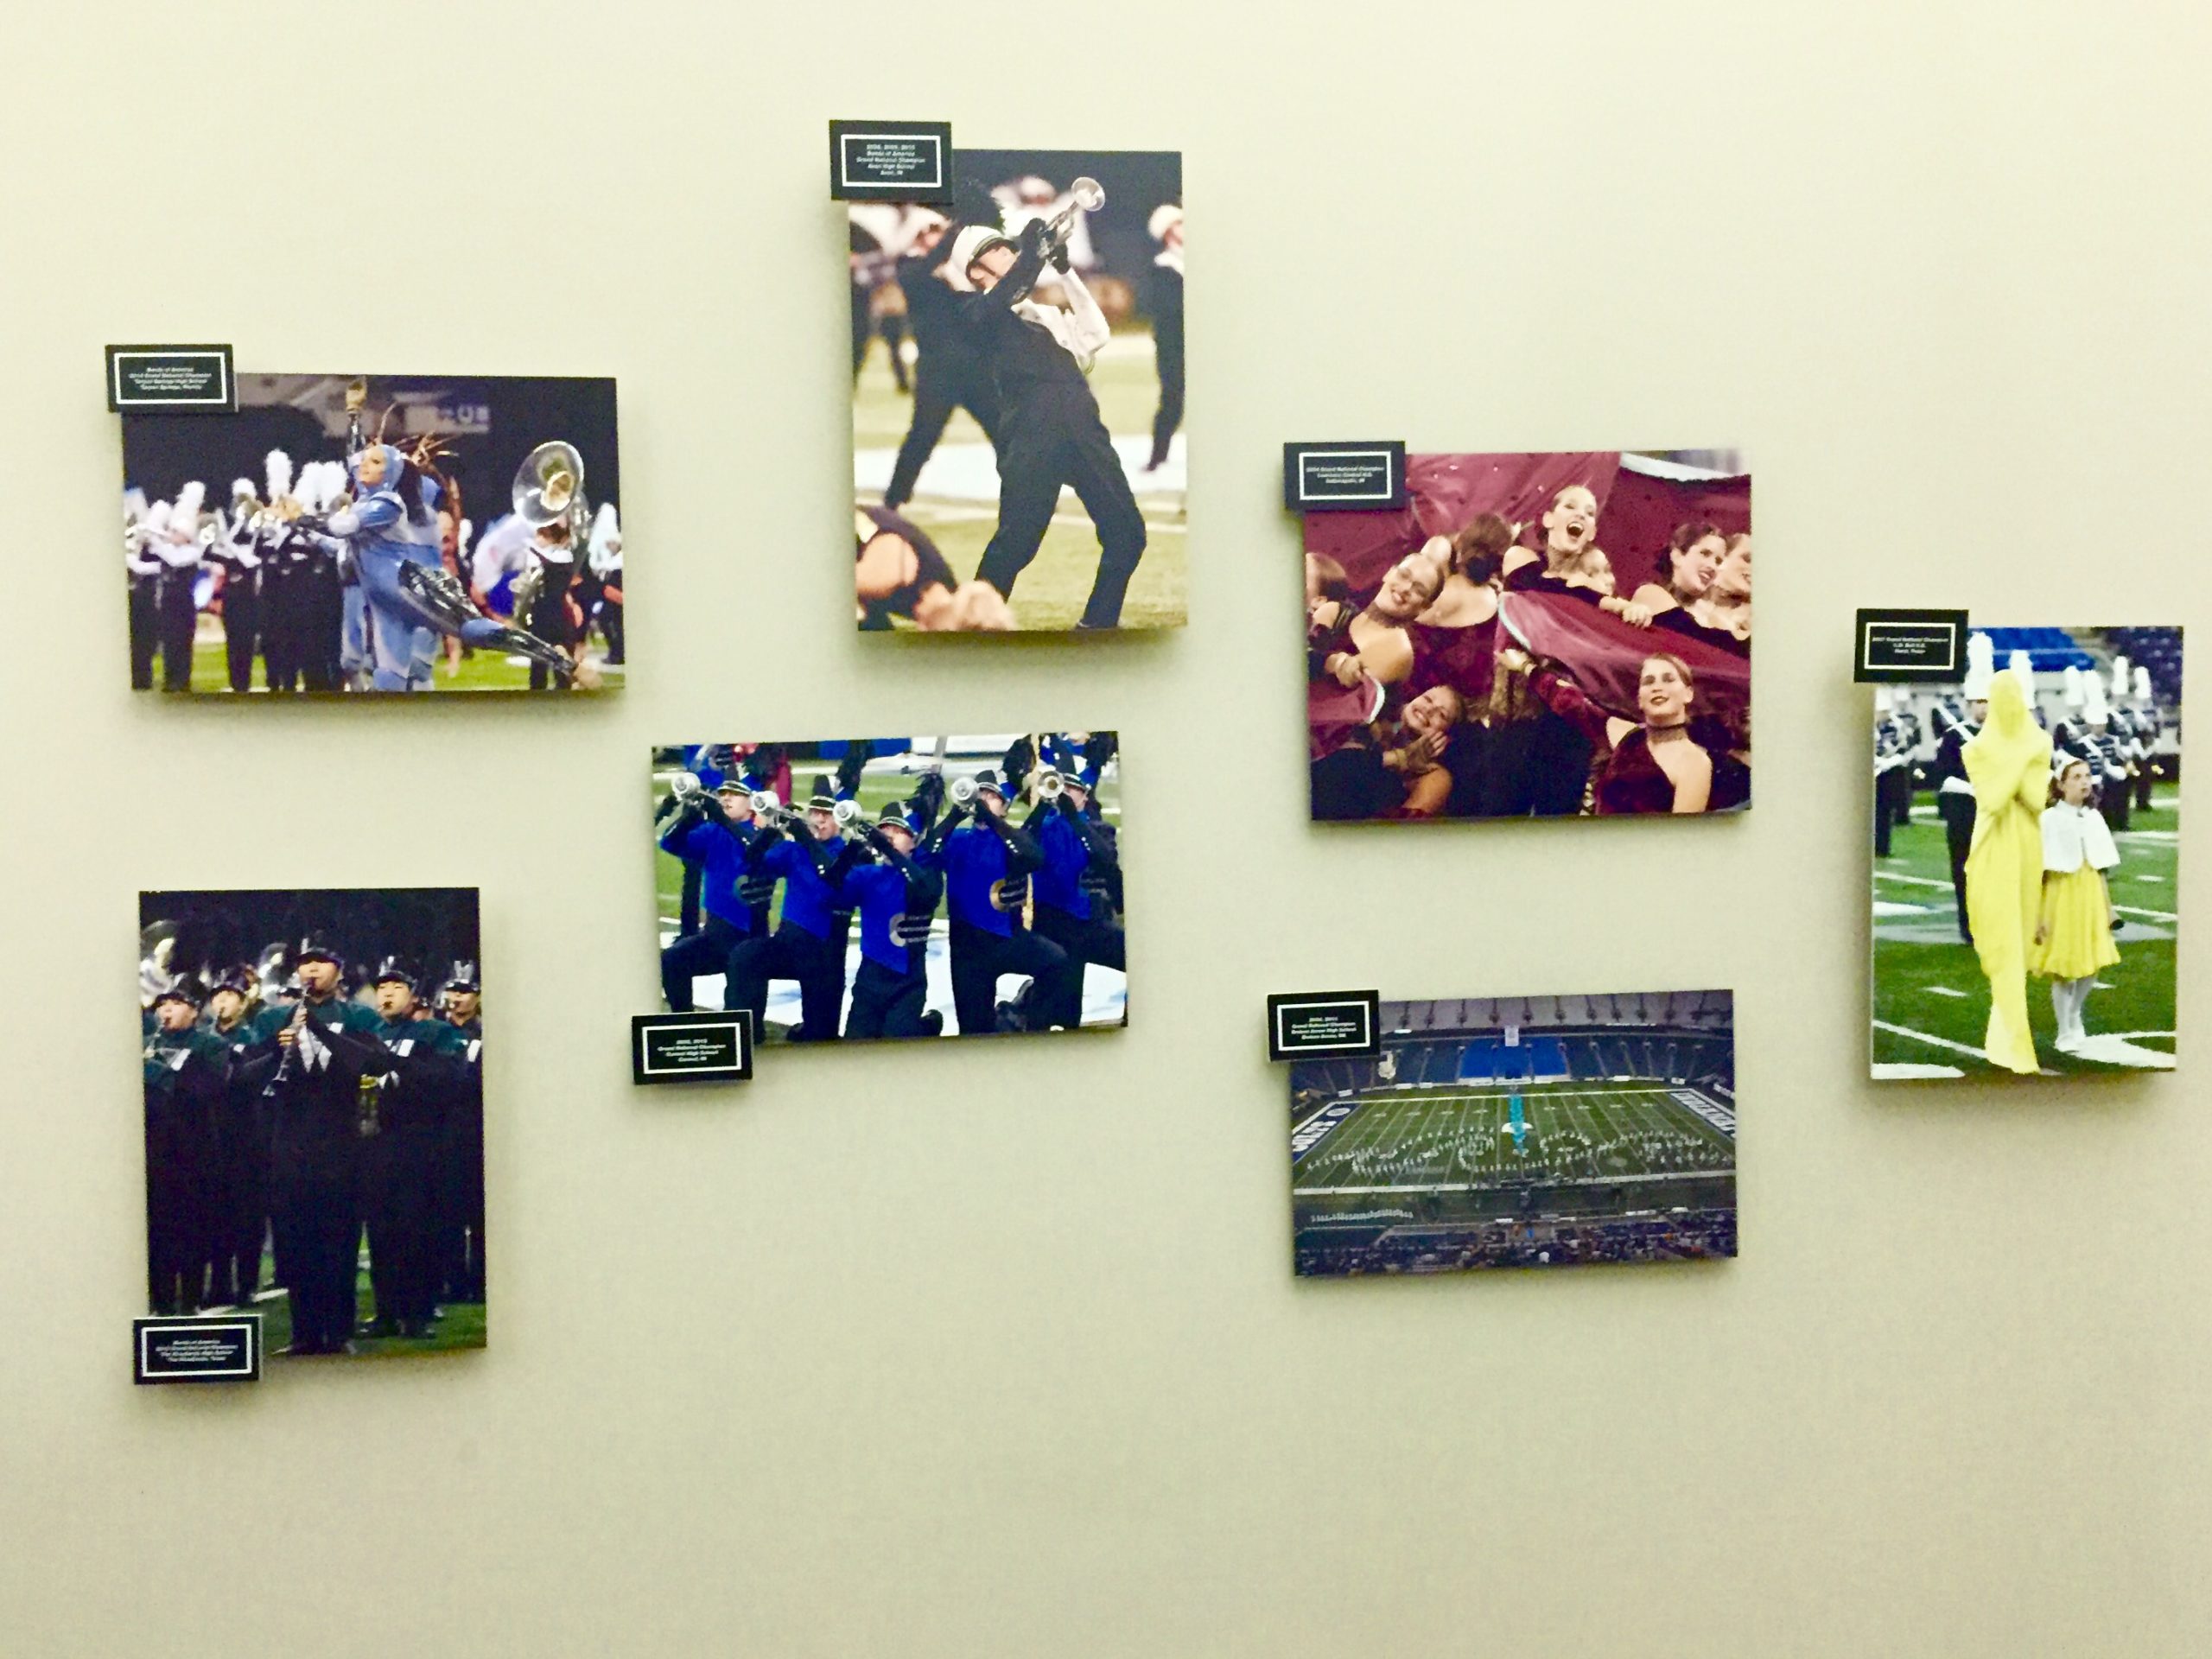 Wall of Champions